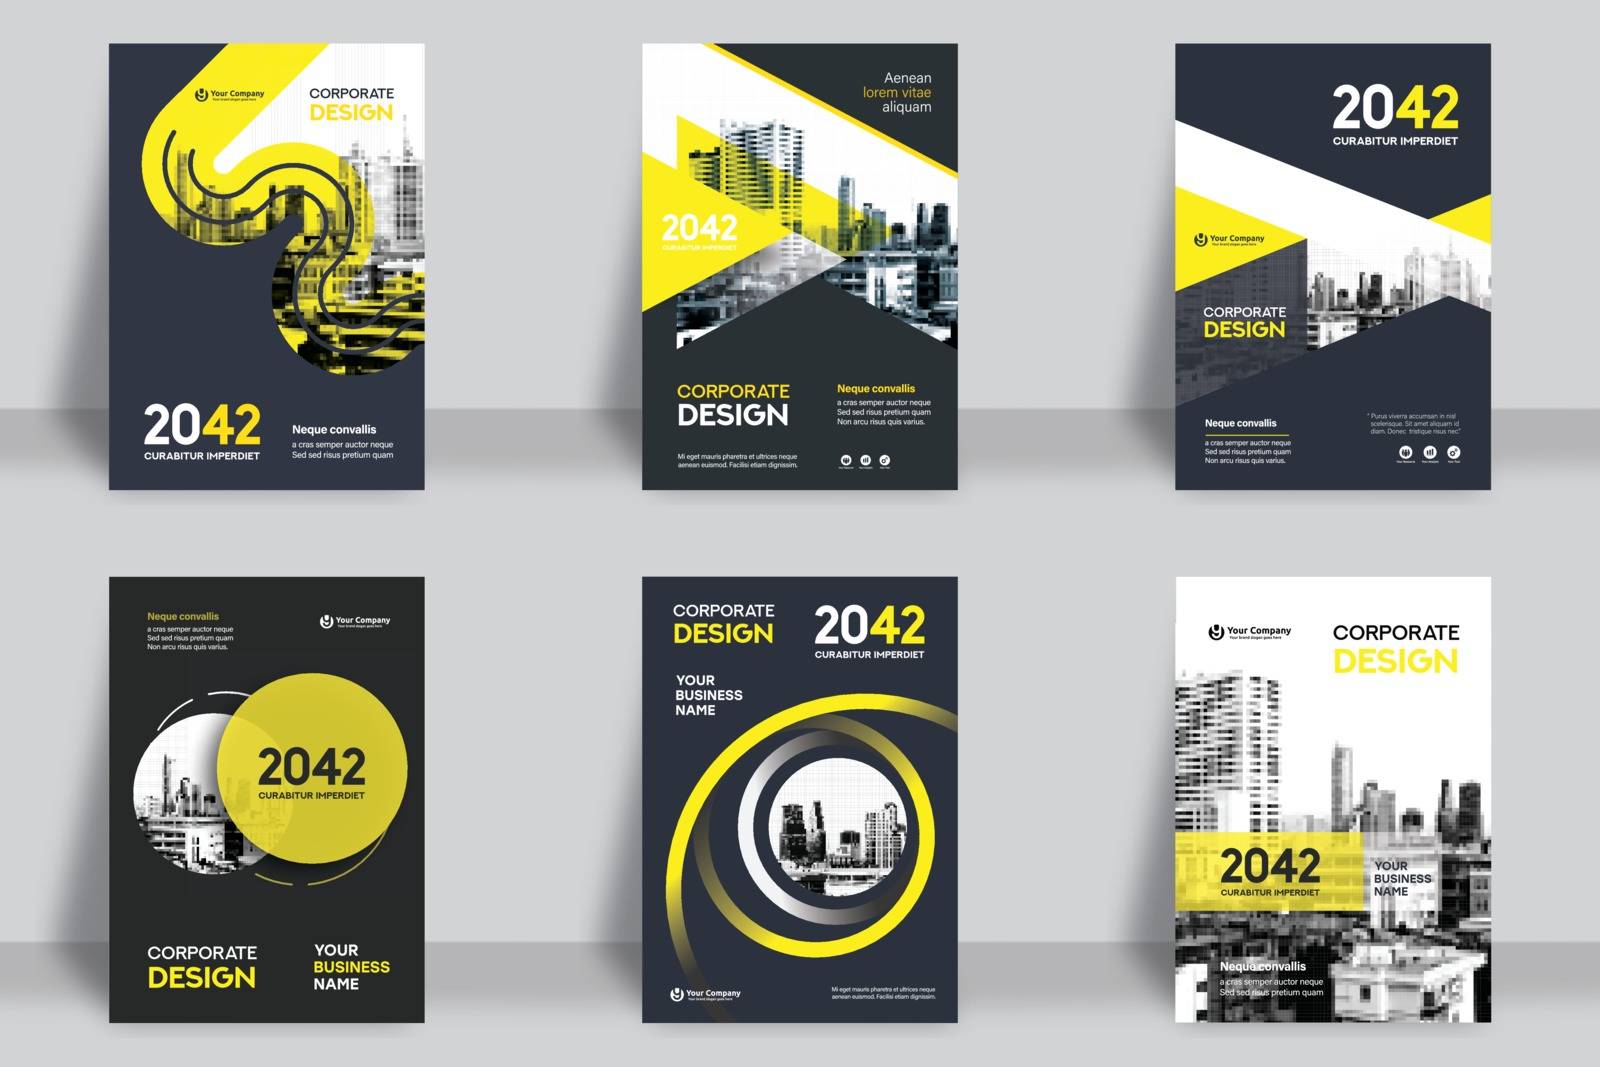 Corporate Book Cover Design Template Set. A4 format. 6 Designs Included. Can be adapt to Brochure, Annual Report, Magazine,Poster, Business Presentation, Portfolio, Flyer, Banner, Website.